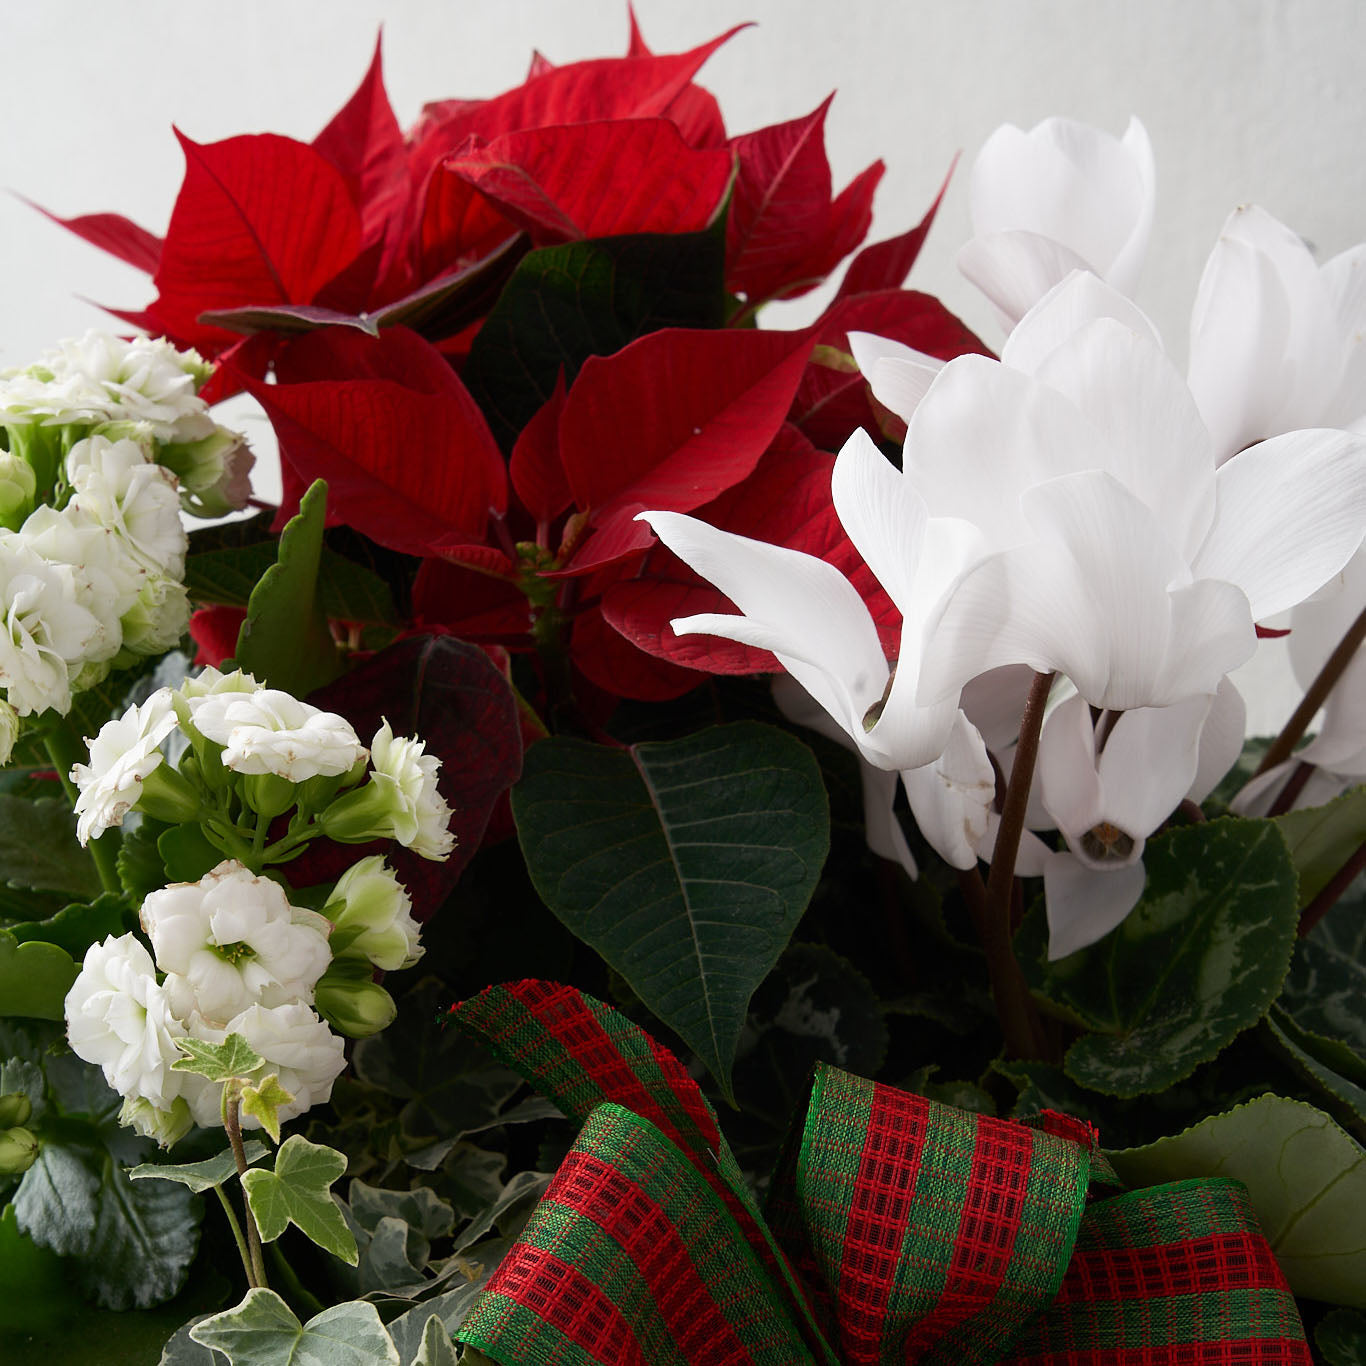 Closeup of red poinsettia, white cyclamen, and white kalanchoe, with green and red ribbon.